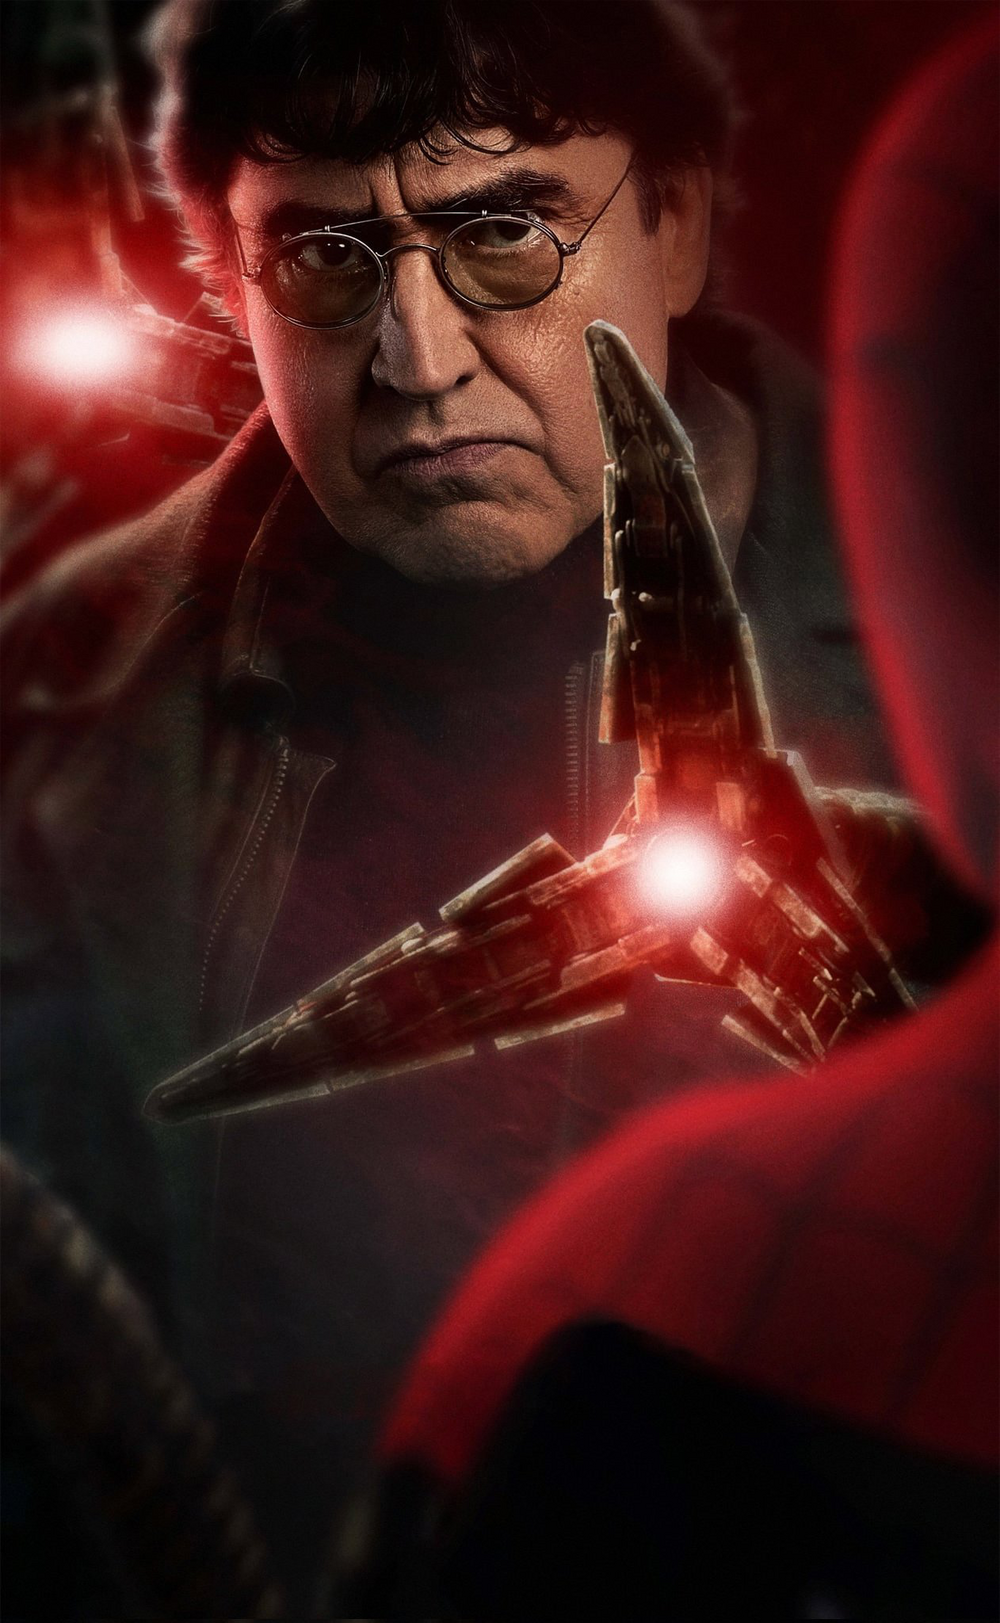 Actor Alfred Molina returning as Dr Octopus in 'Spider-Man 3